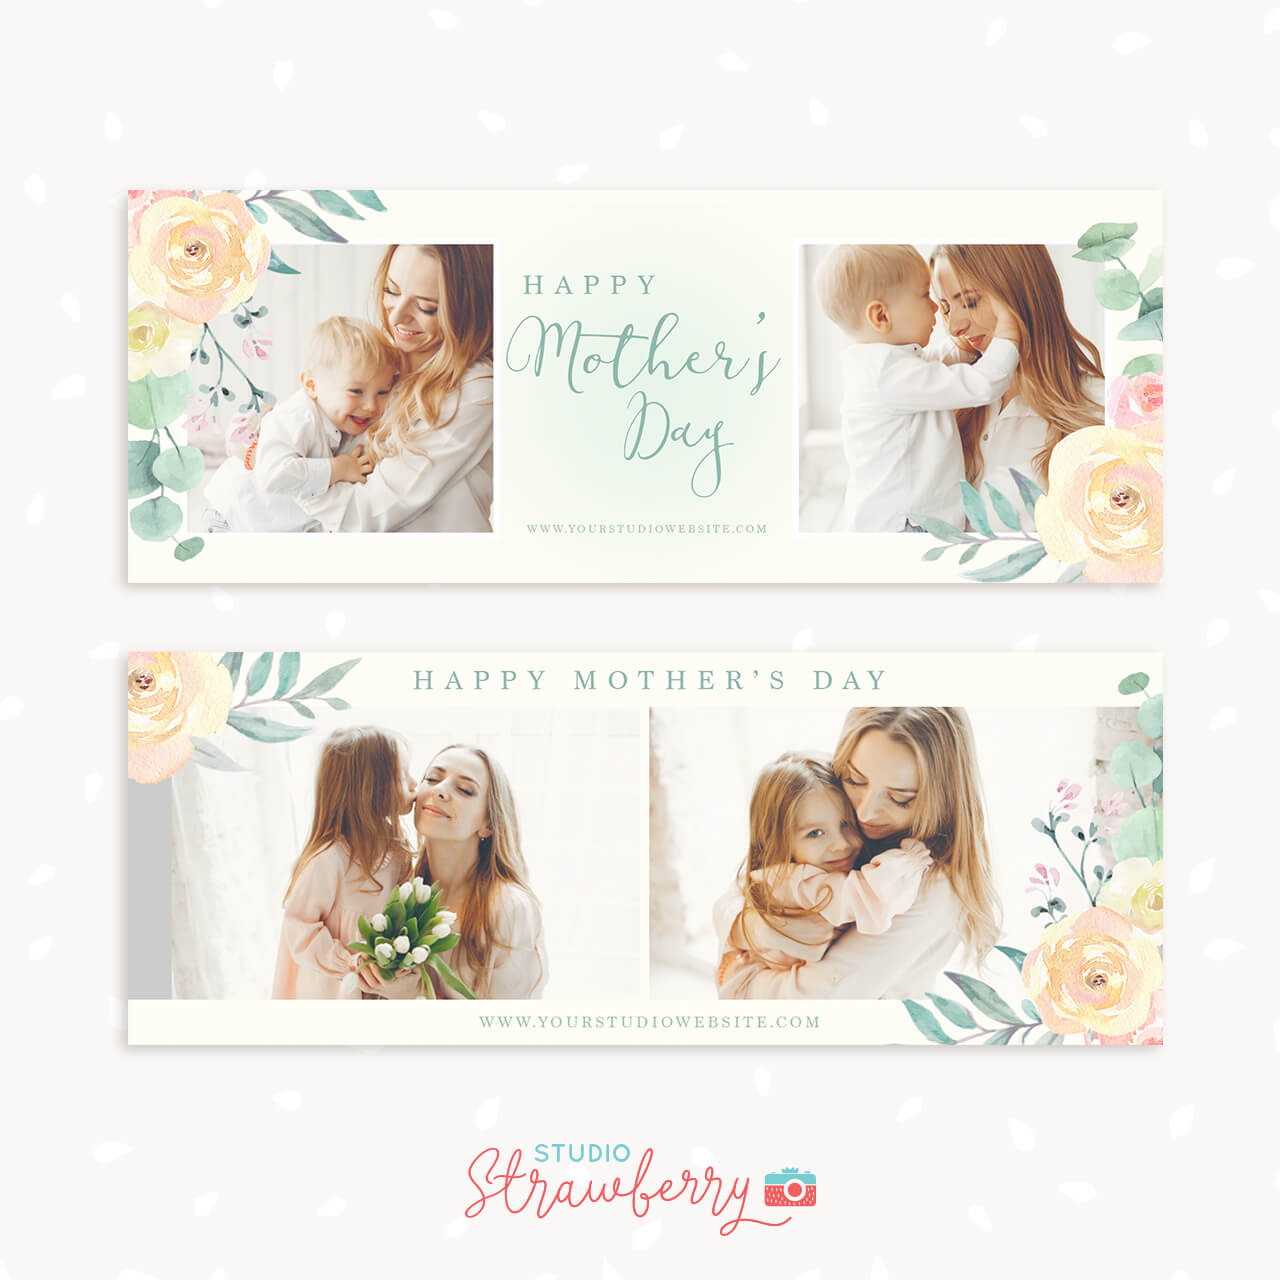 Mothers day facebook covers